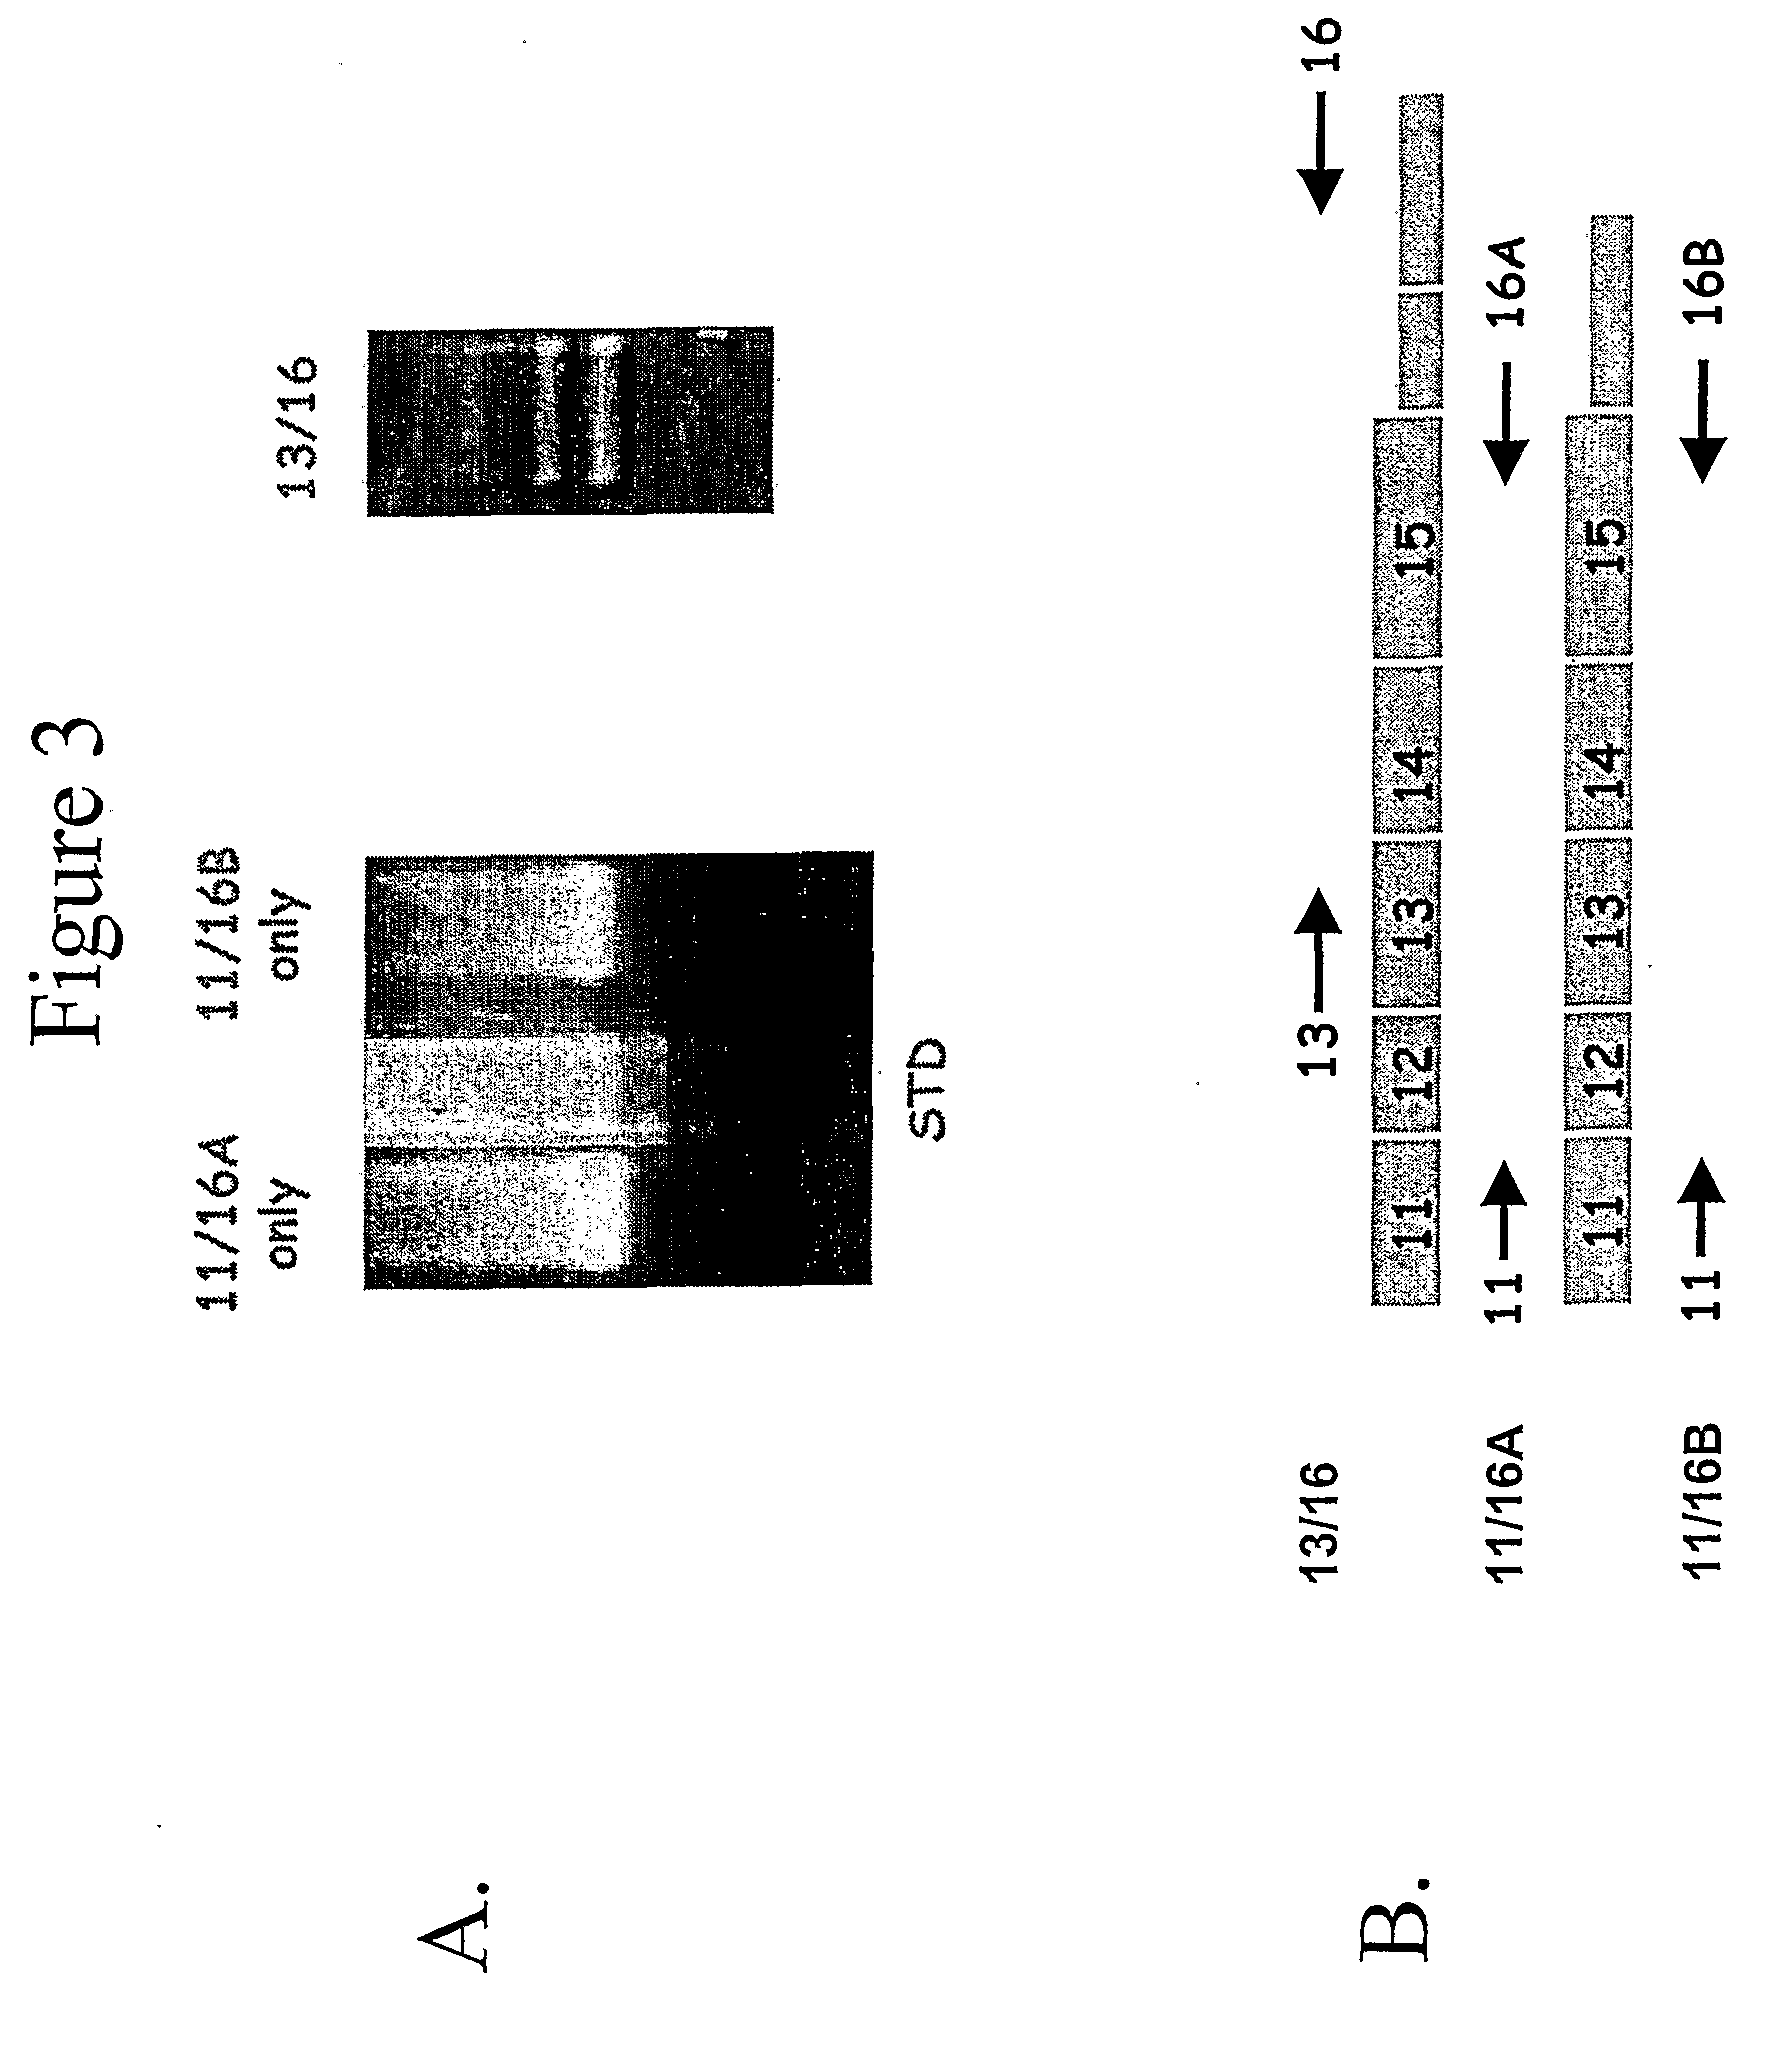 Method of diagnosing and treating cancer using b-catenin splice variants